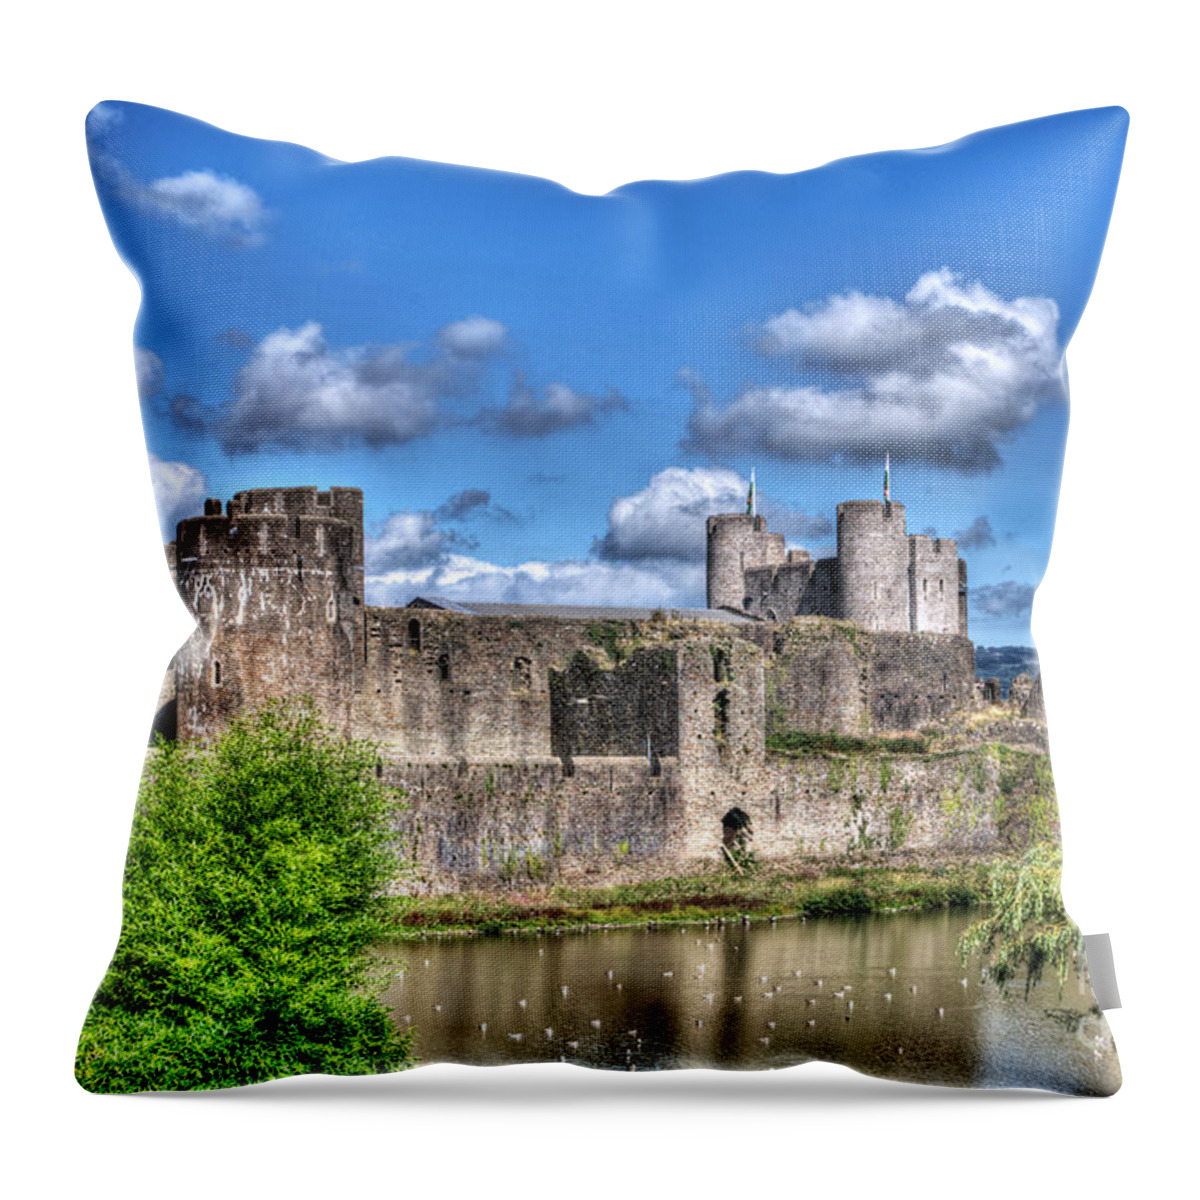 Caerphilly Castle Throw Pillow featuring the photograph Caerphilly Castle 4 by Steve Purnell